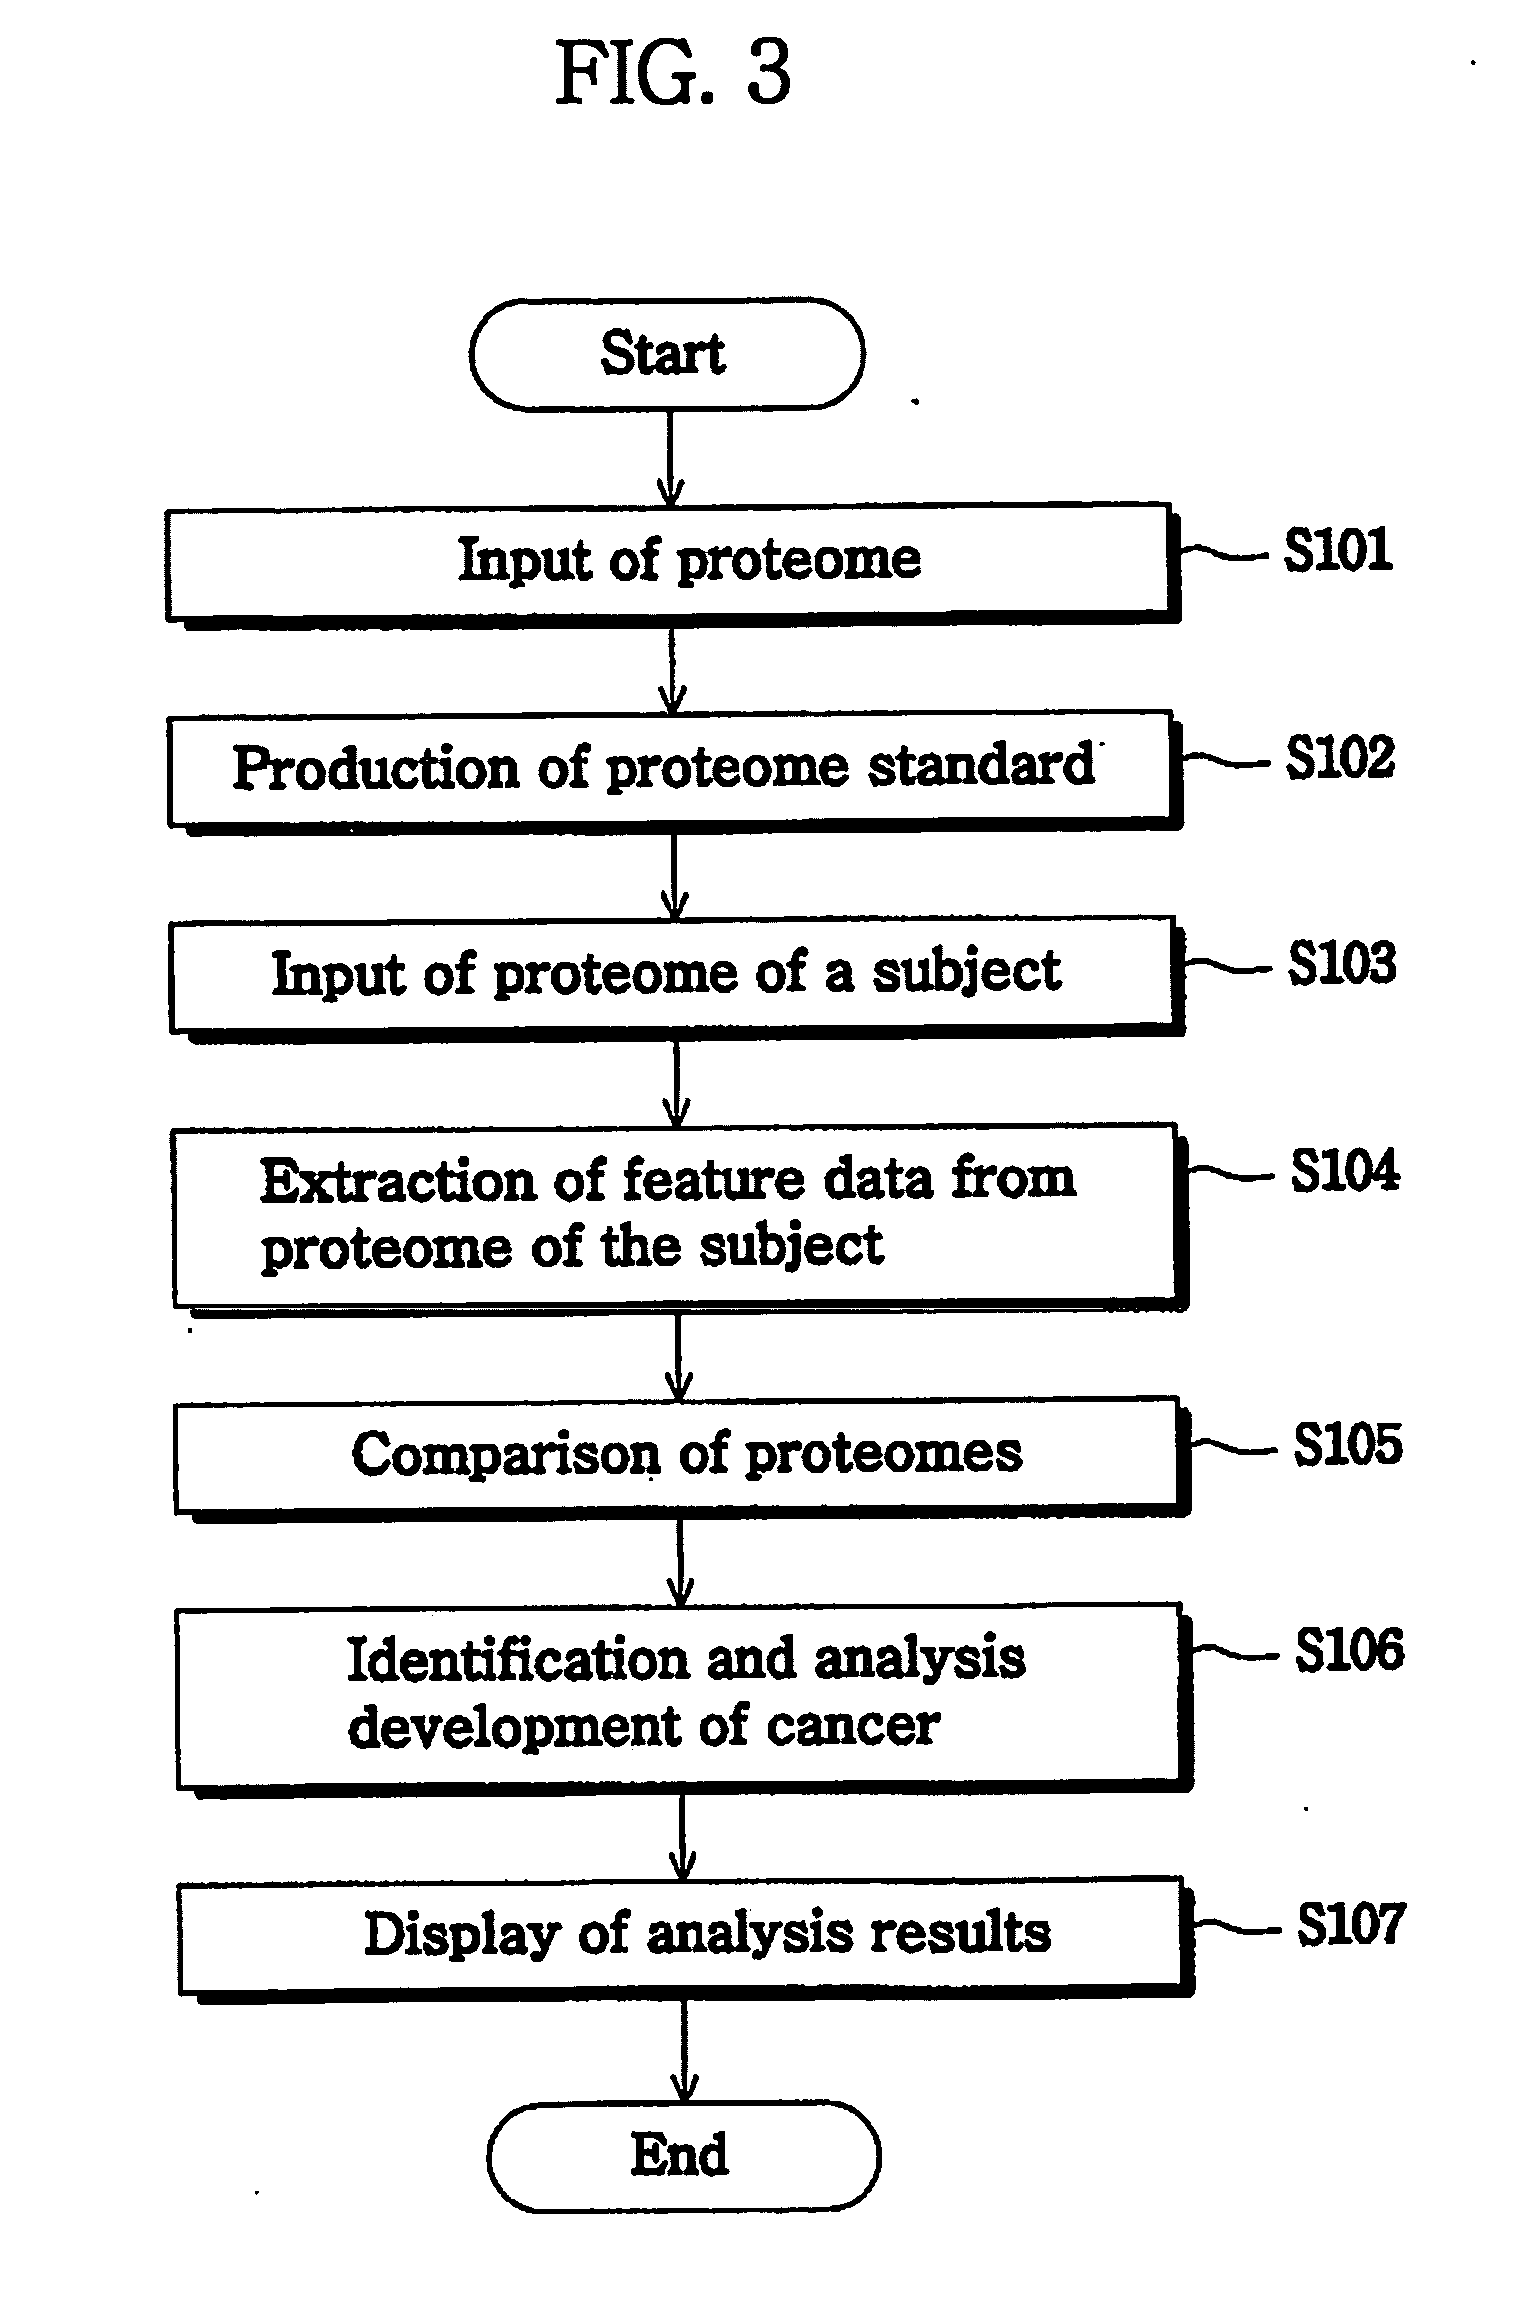 Method and system for analysis of cancer biomarkers using proteome image mining